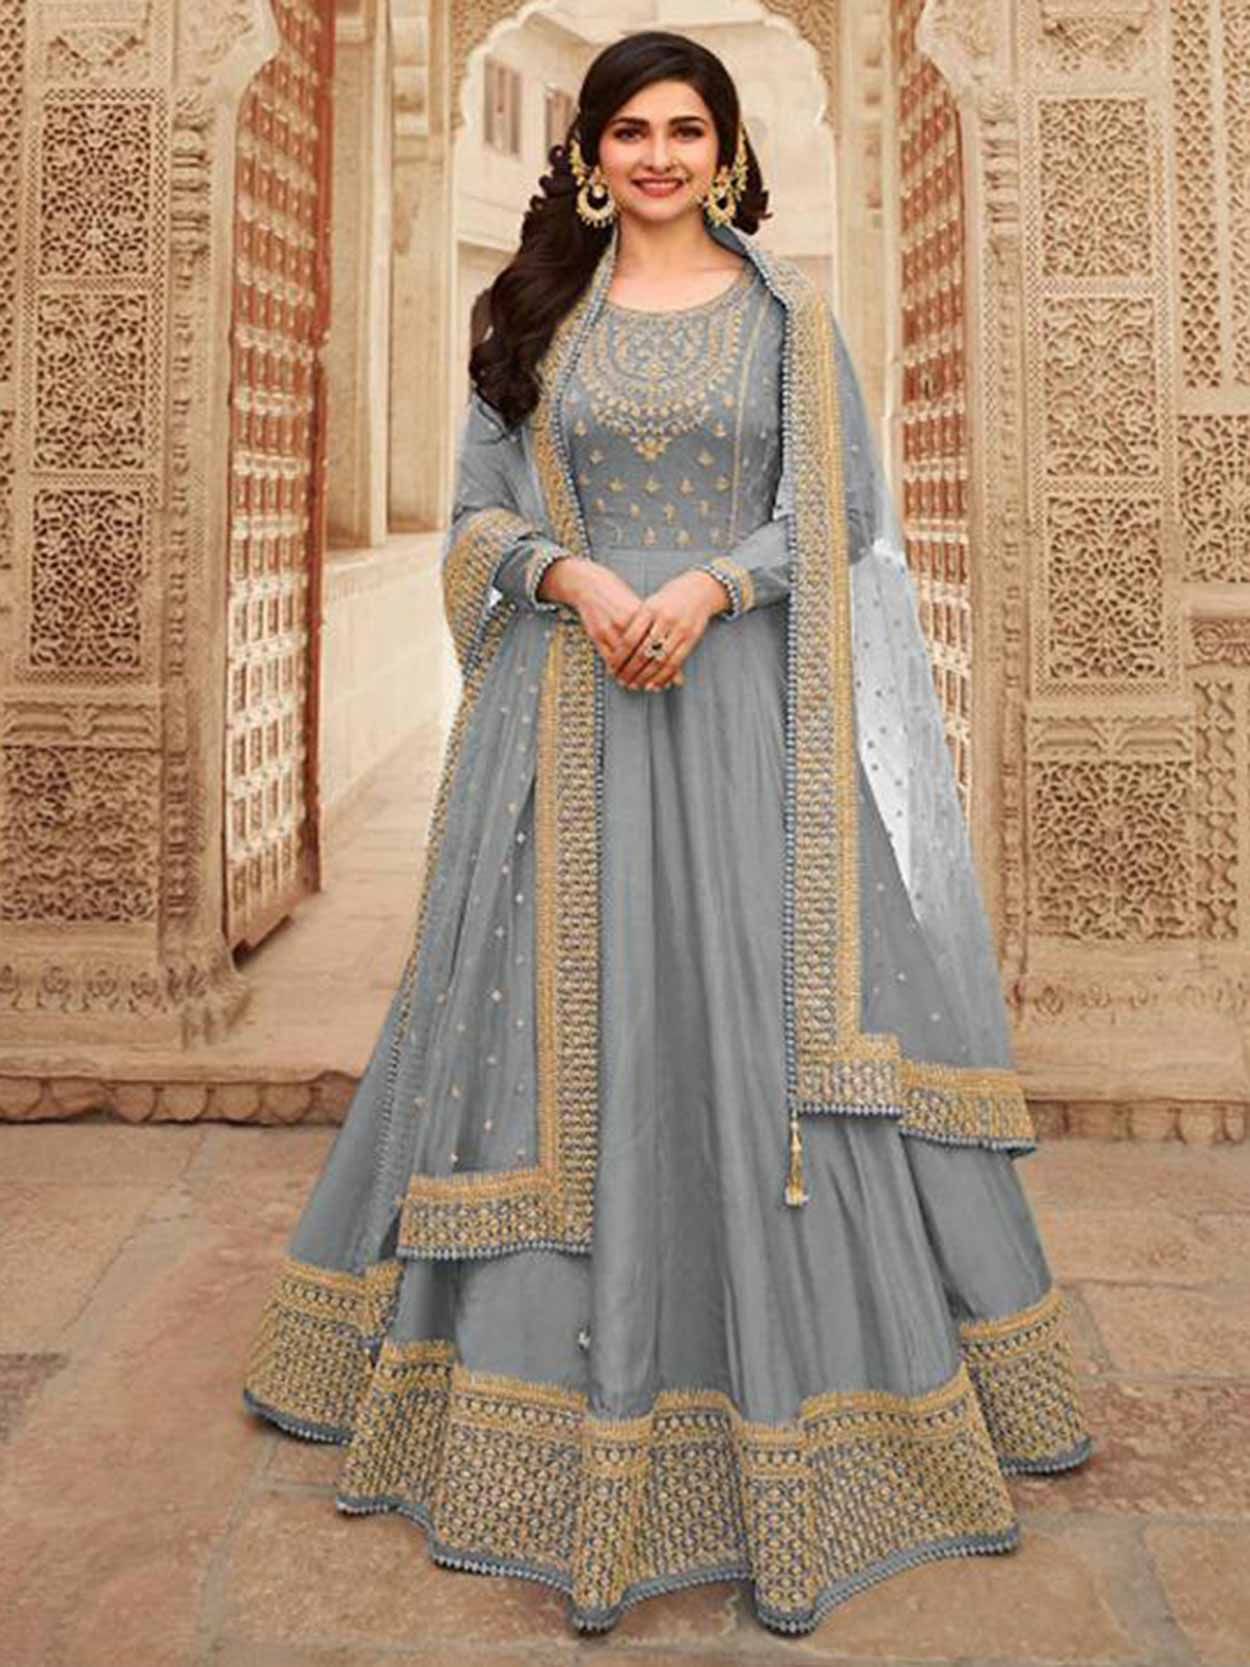 Delisa indian/Pakistani Bollywood Party Wear Long Anarkali Gown For Womens  NG (Blue, X-SMALL-36) at Amazon Women's Clothing store